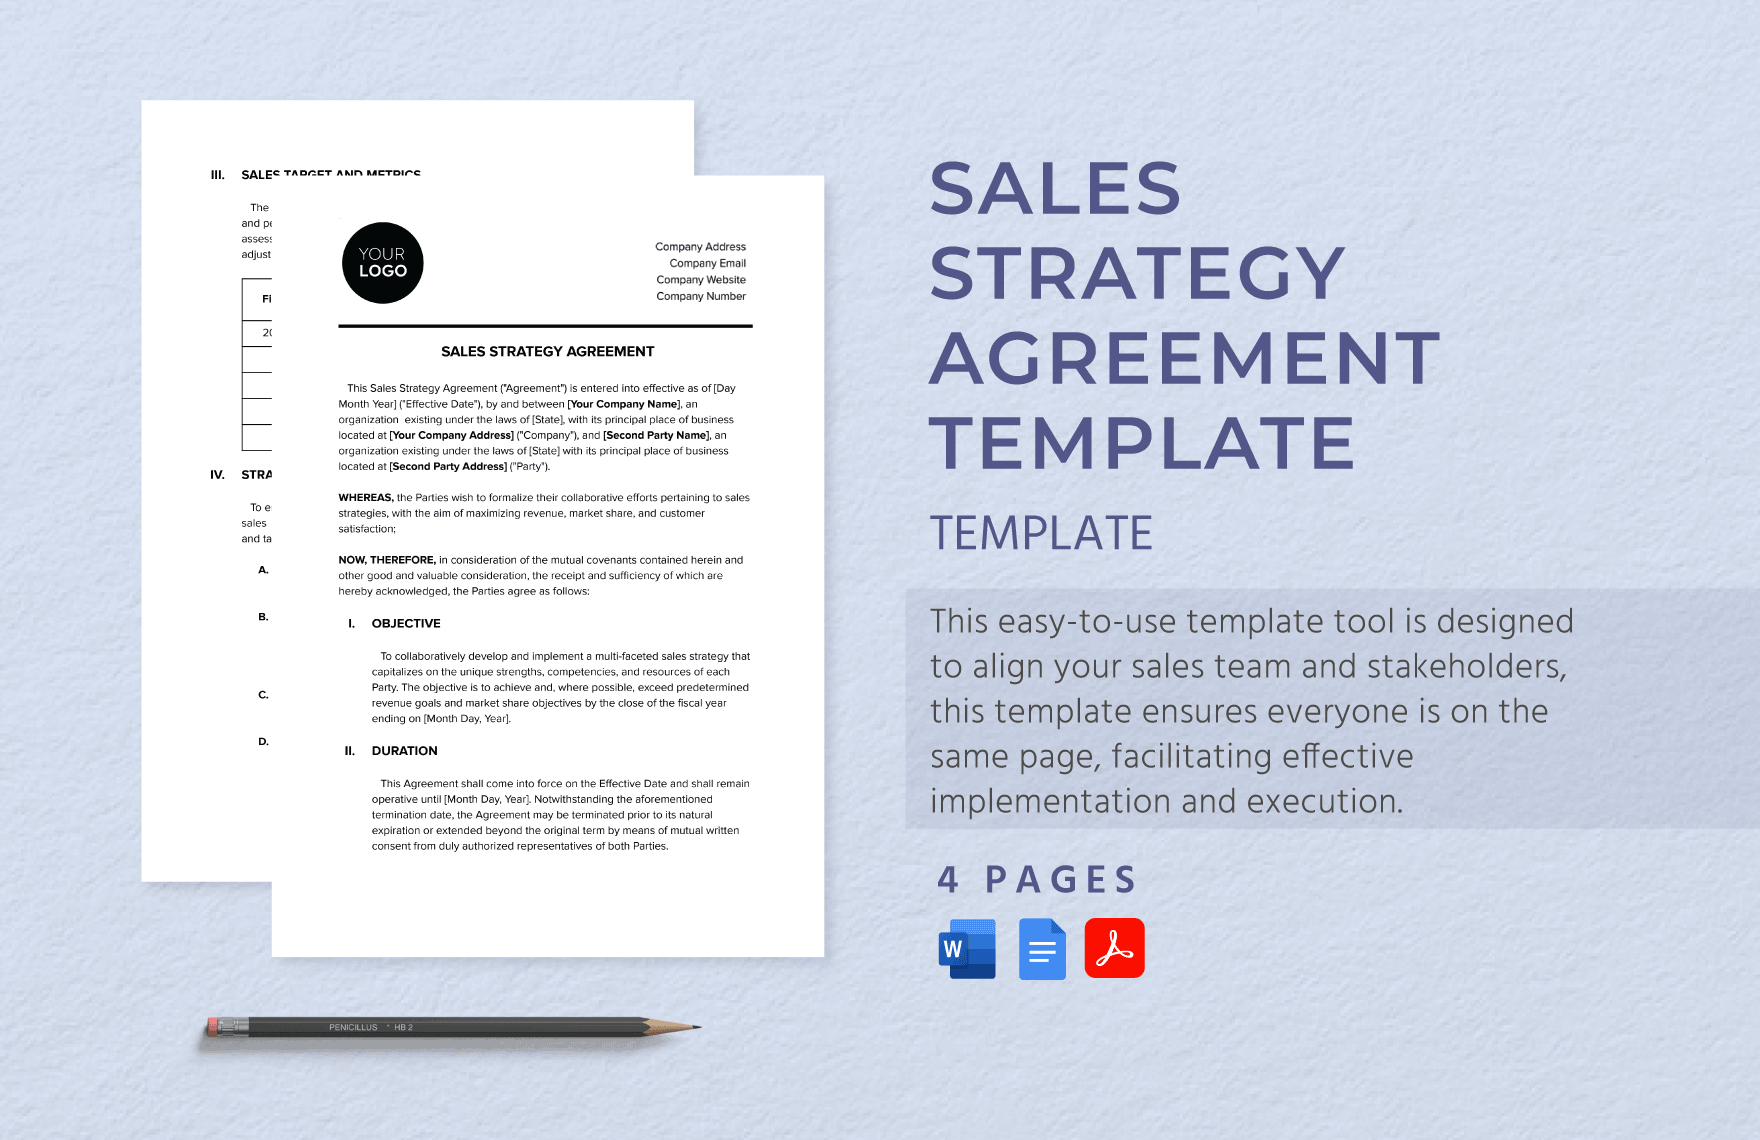 Sales Strategy Agreement Template in Word, Google Docs, PDF